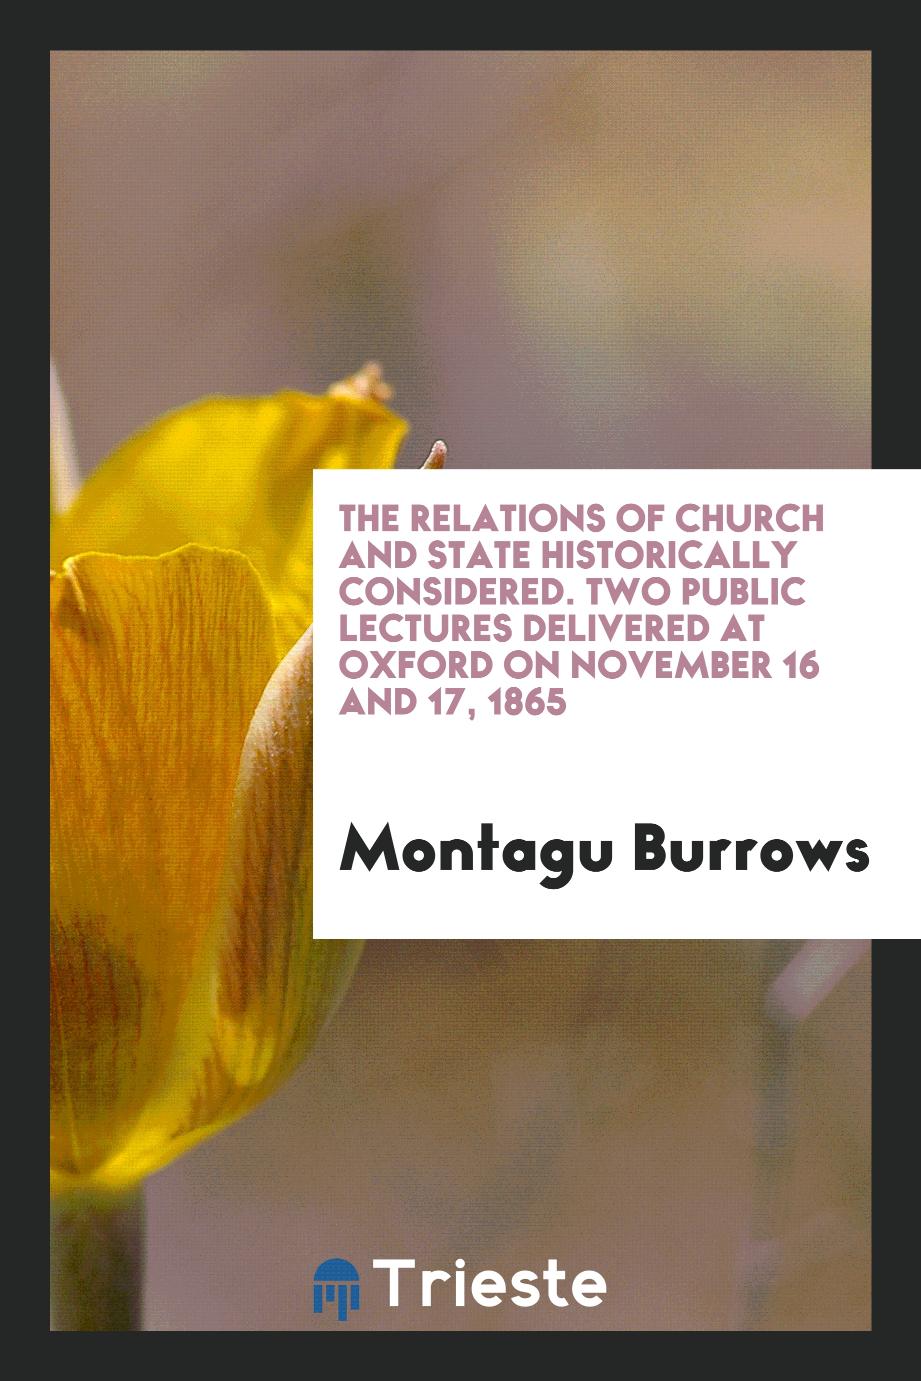 The relations of Church and State historically considered. Two public lectures delivered at Oxford on November 16 and 17, 1865